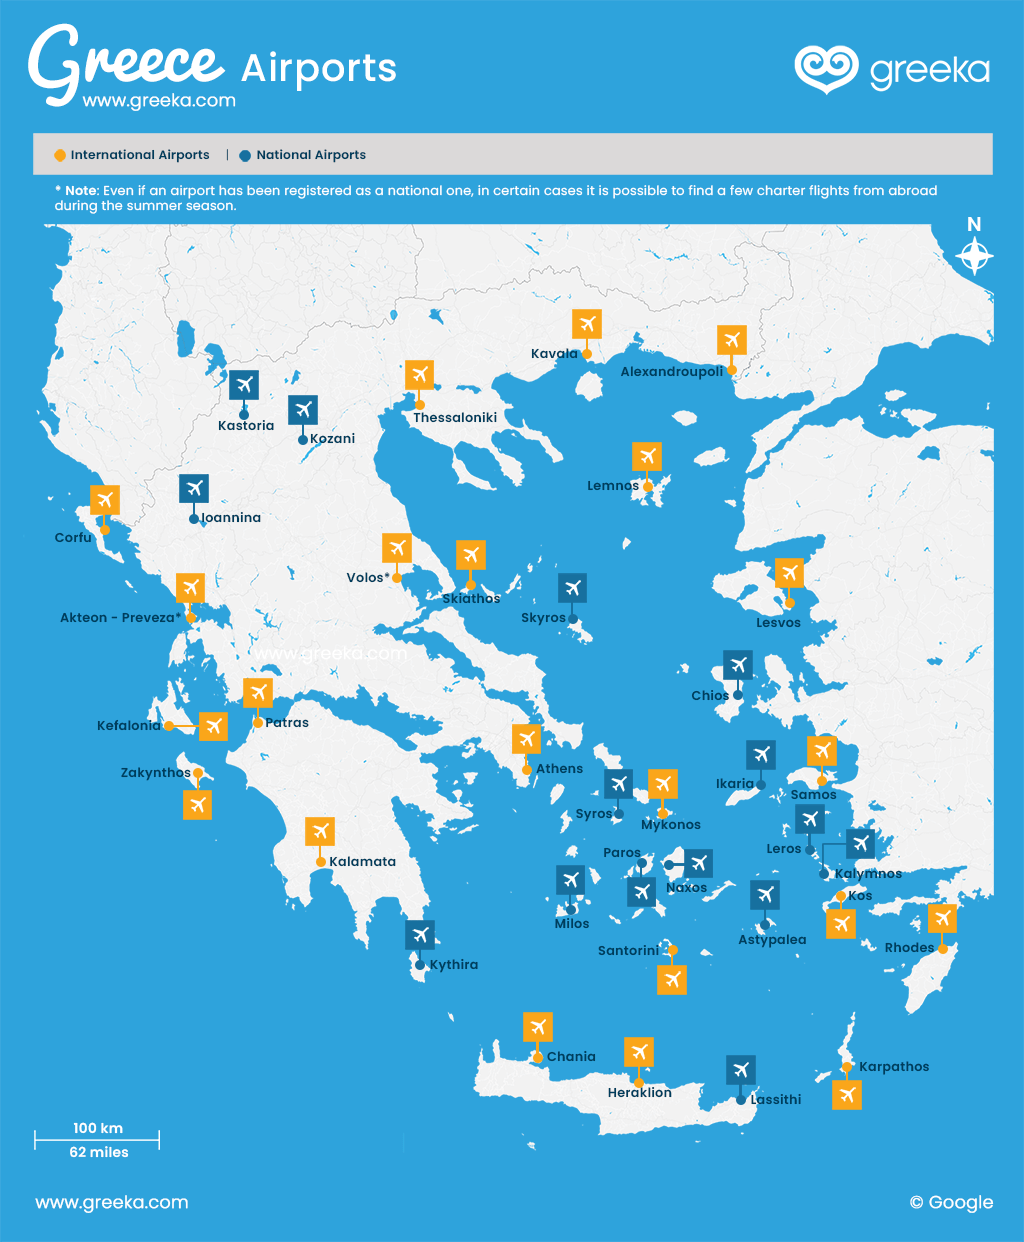 Greece Airports map